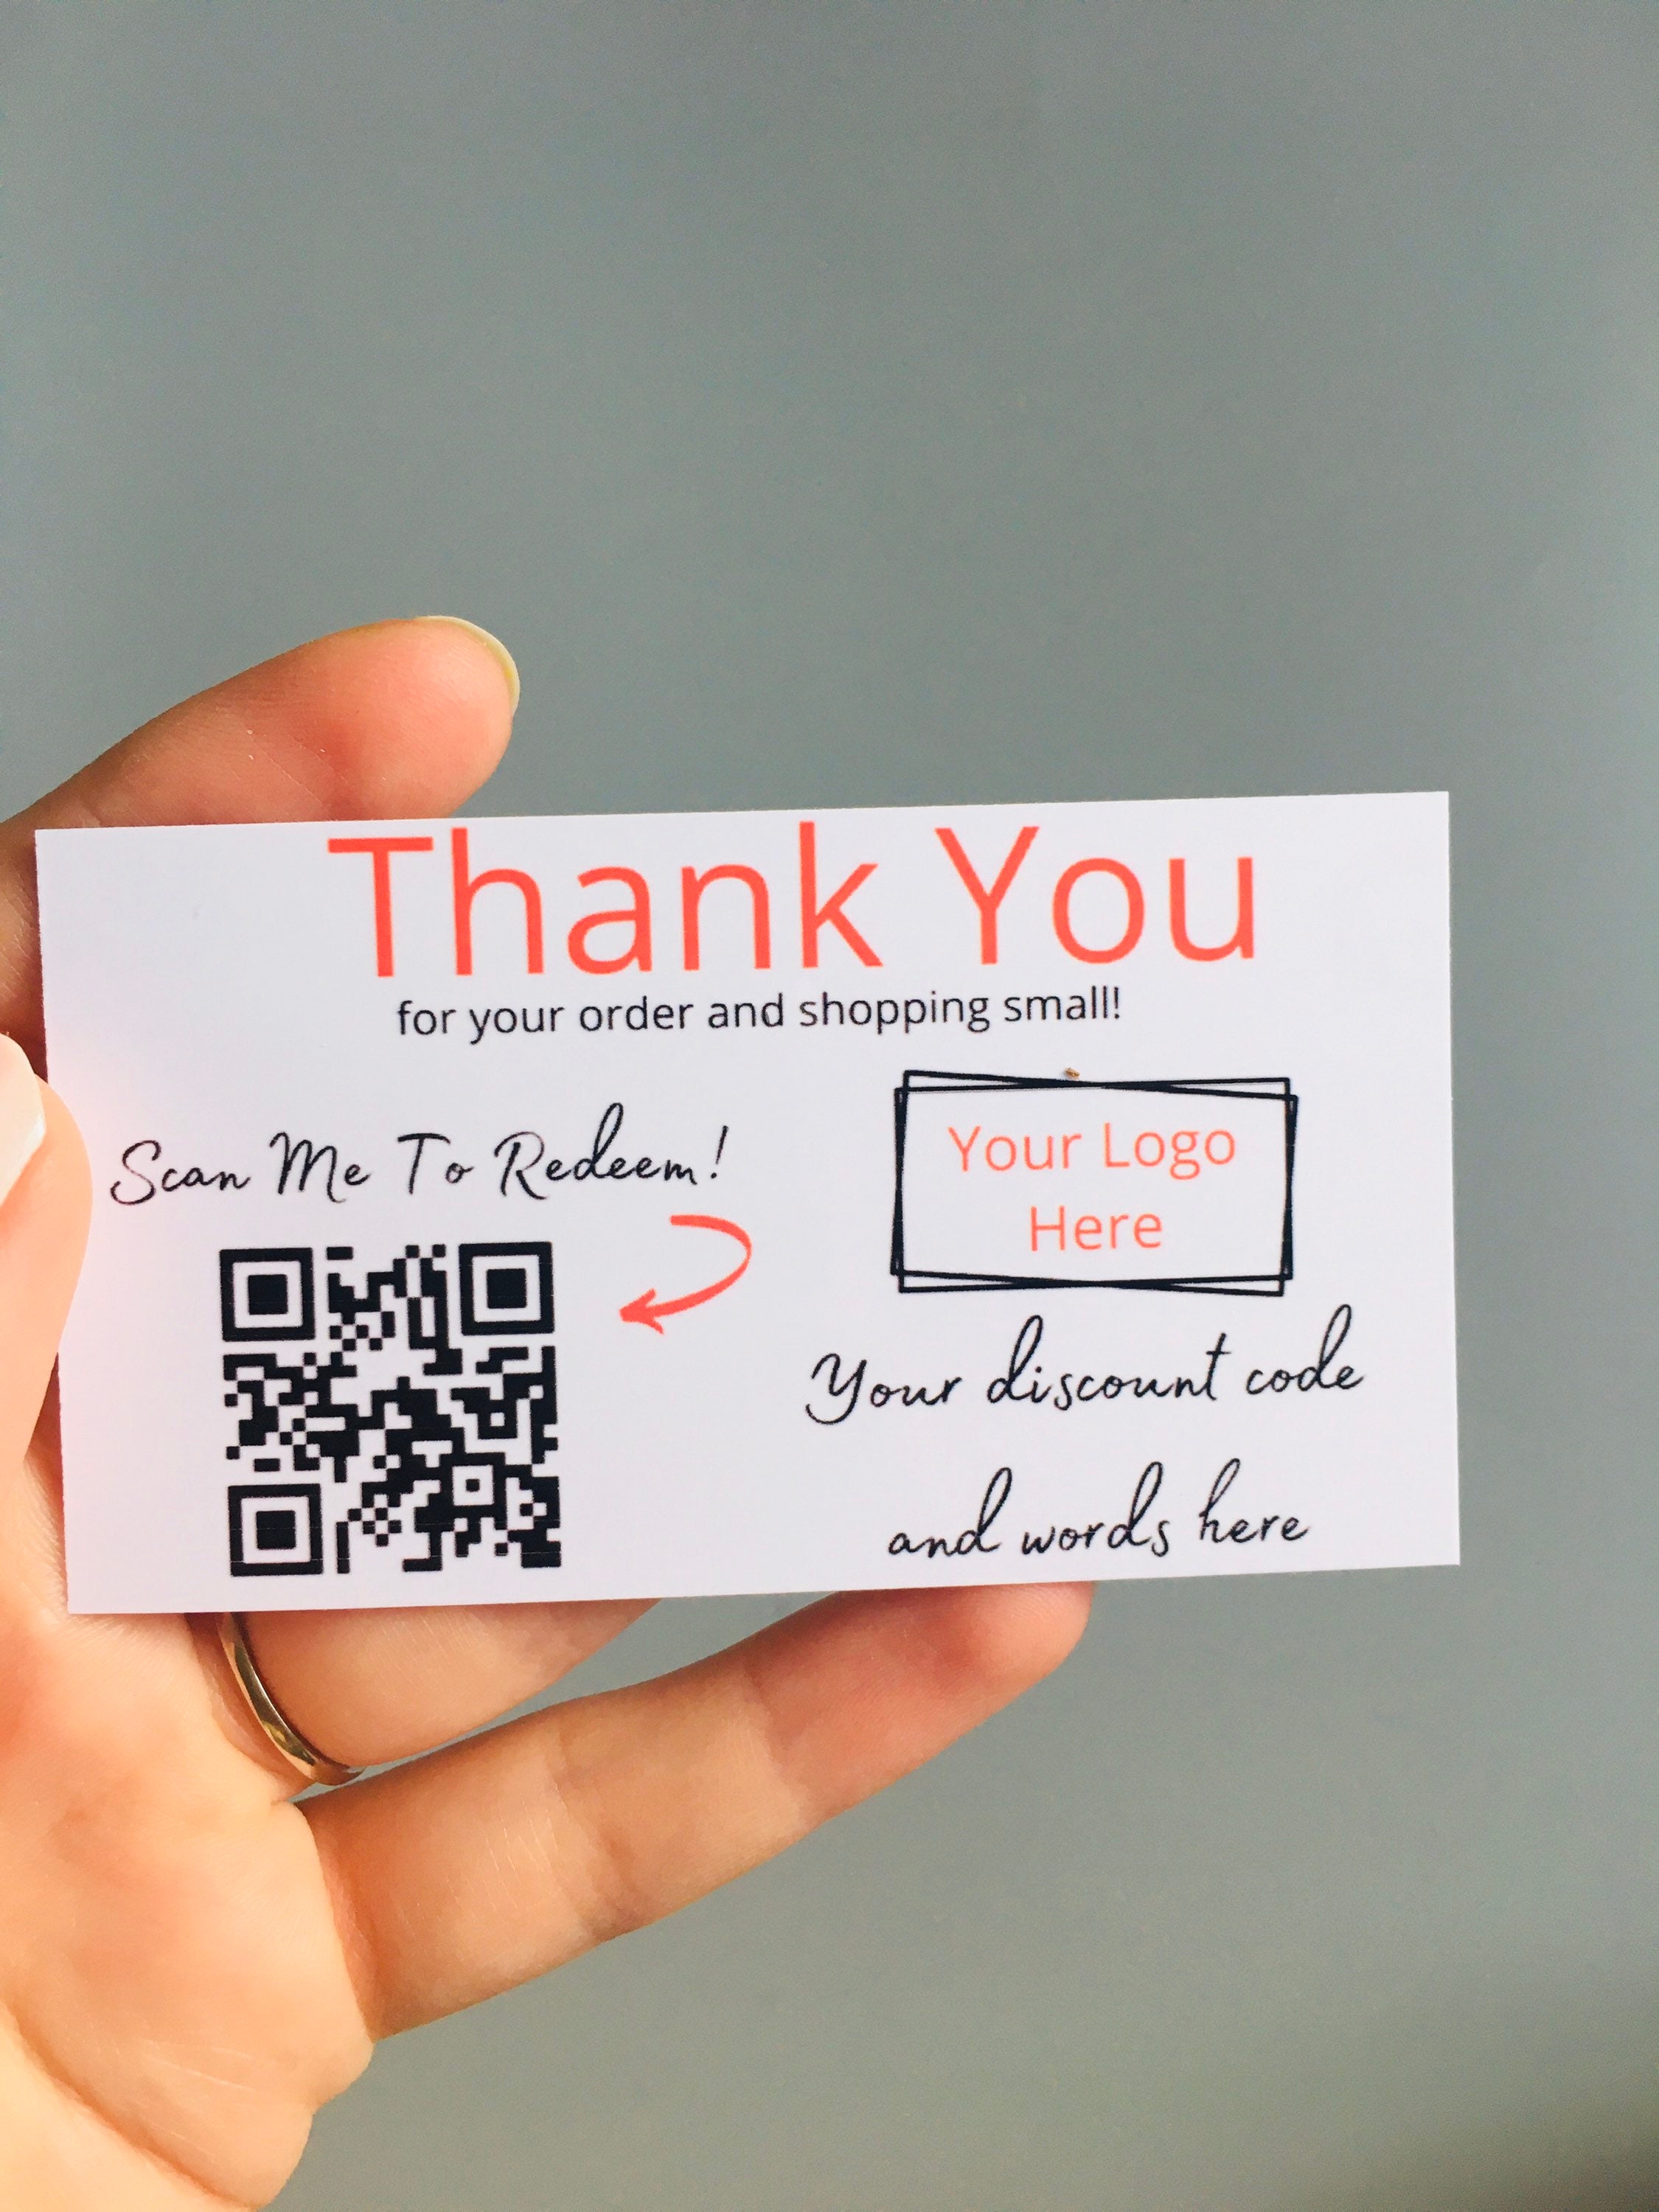   Thank You for Purchase Cards with Feedback Request & QR  Code Link - 2 x 3.5 - Business Card Size - Small Business - Online Store  Retailer - Package